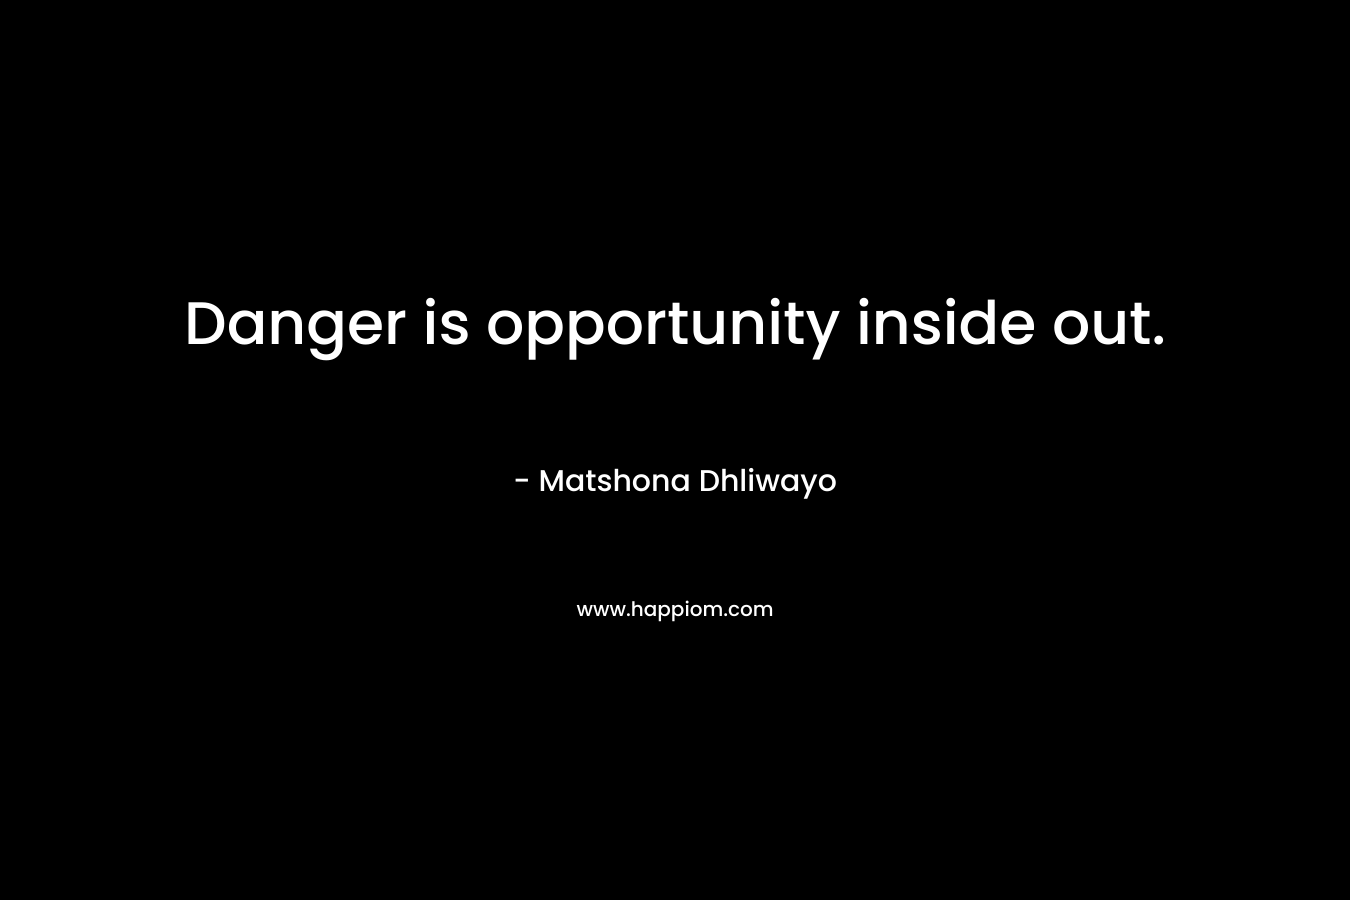 Danger is opportunity inside out.